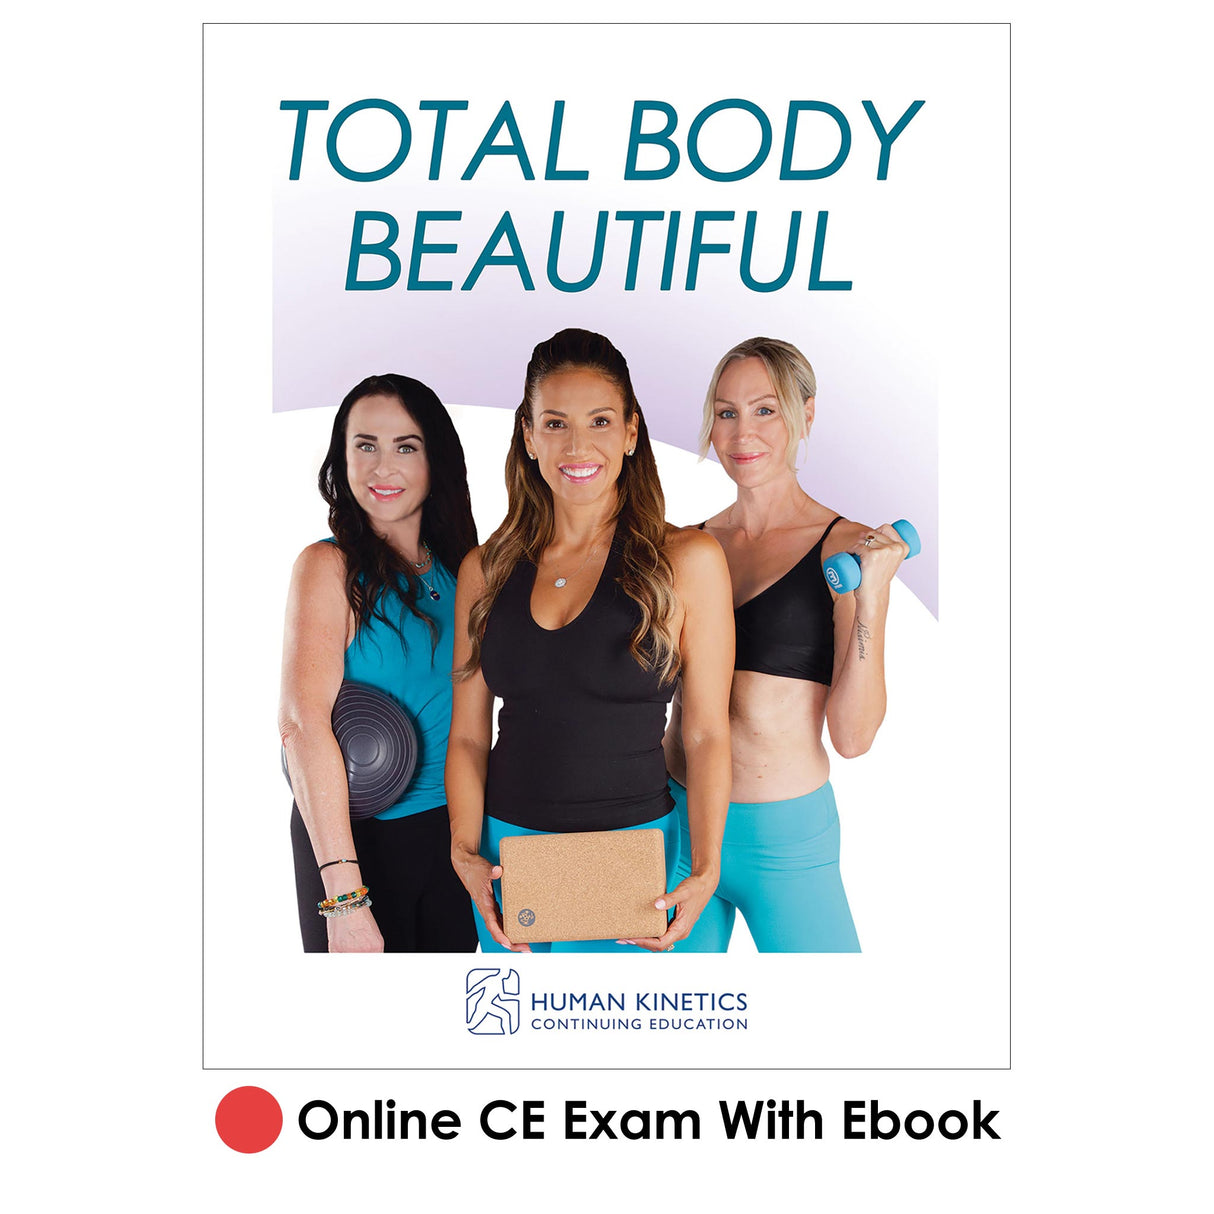 Total Body Beautiful Online CE Exam With Ebook